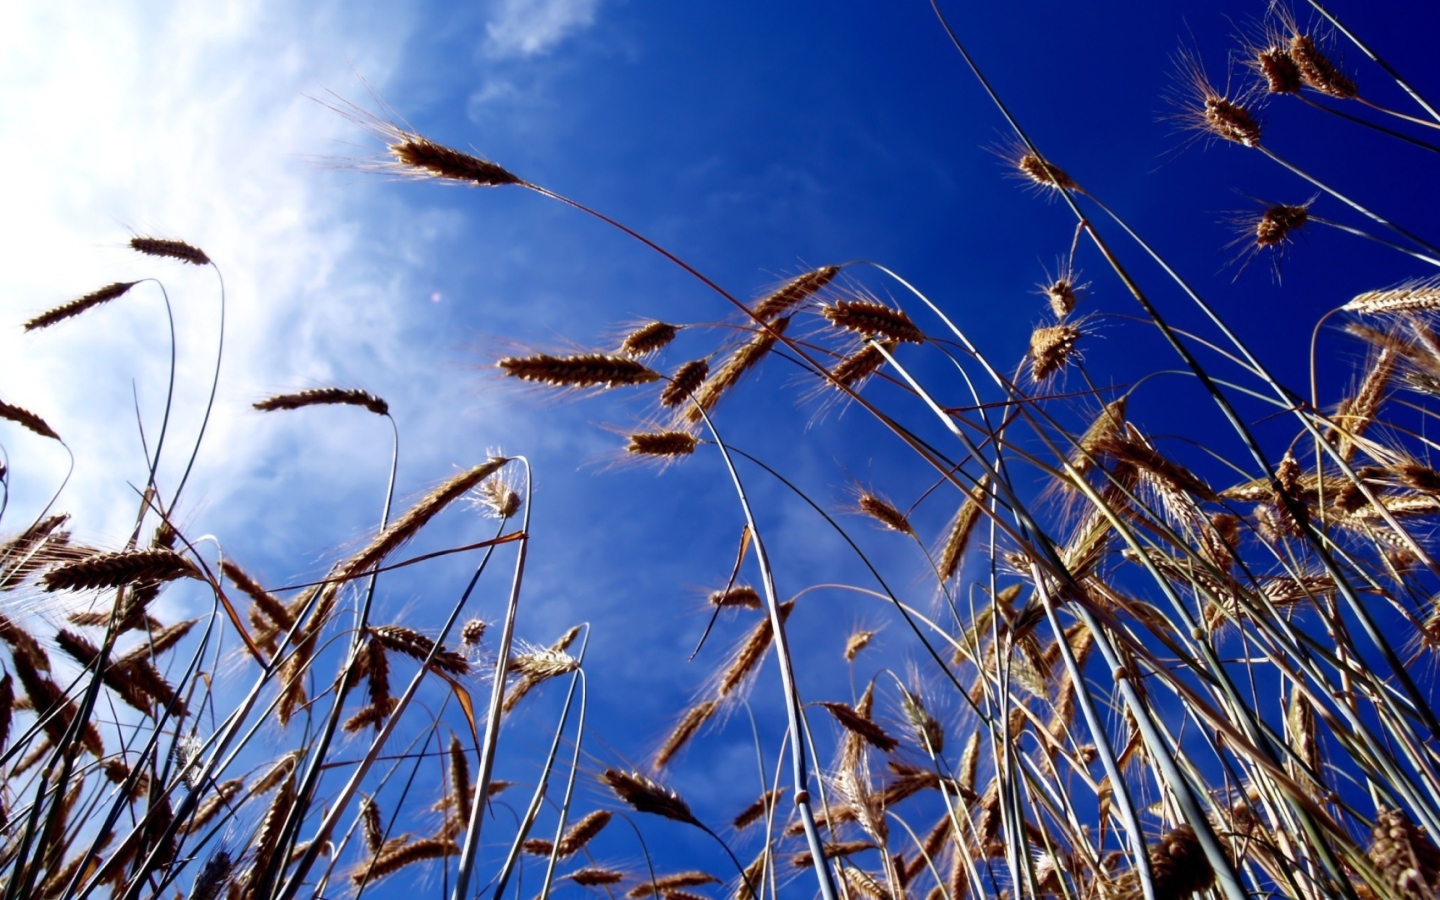 Wheat And Blue Sky wallpaper 1440x900